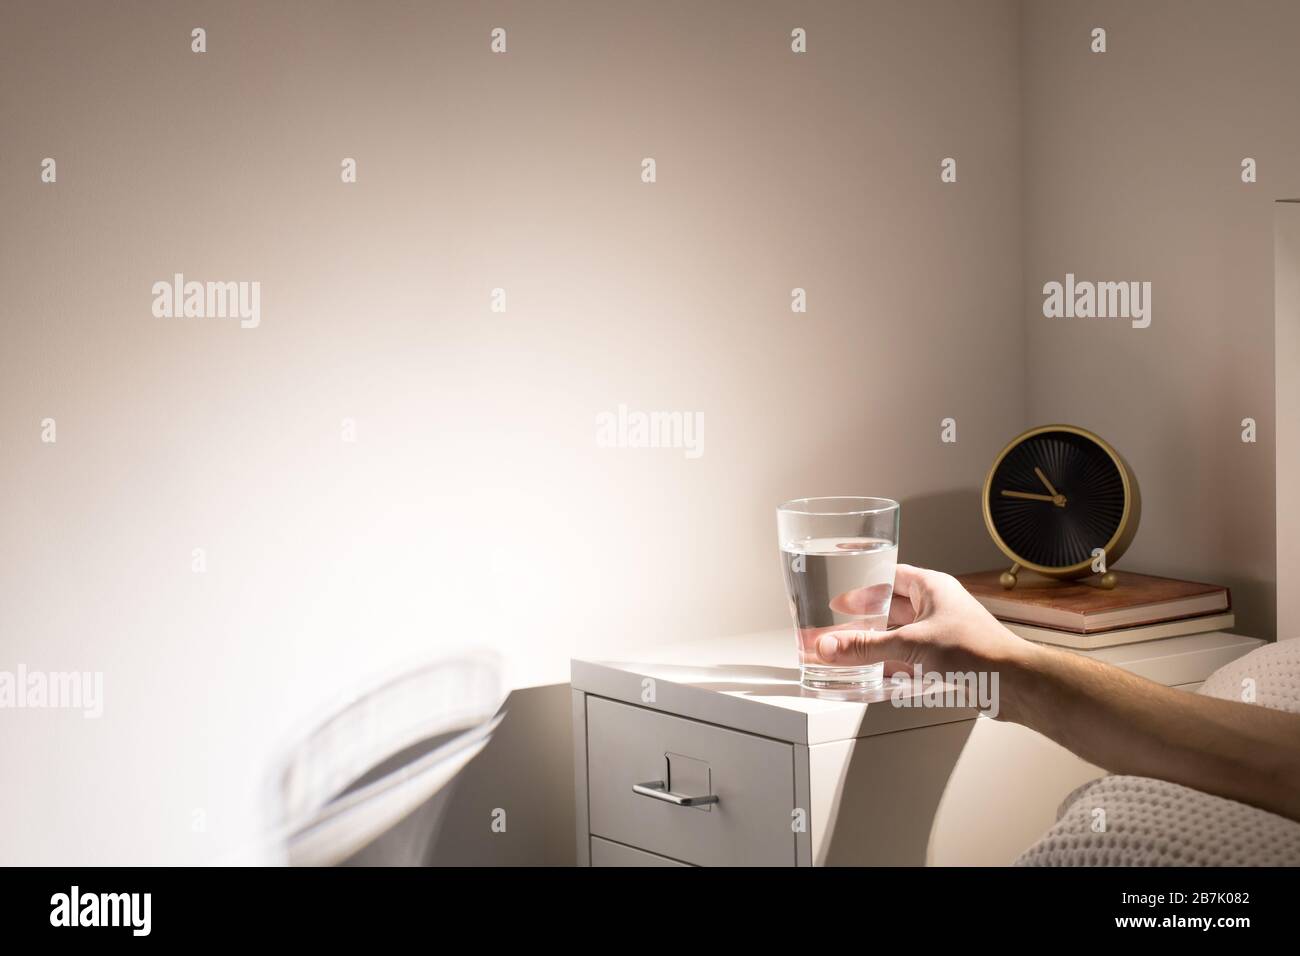 Good habit - drinking a glass of water before going to sleep. Man in bed taking glass of water from bedside table before bedtime, copy space. Stock Photo